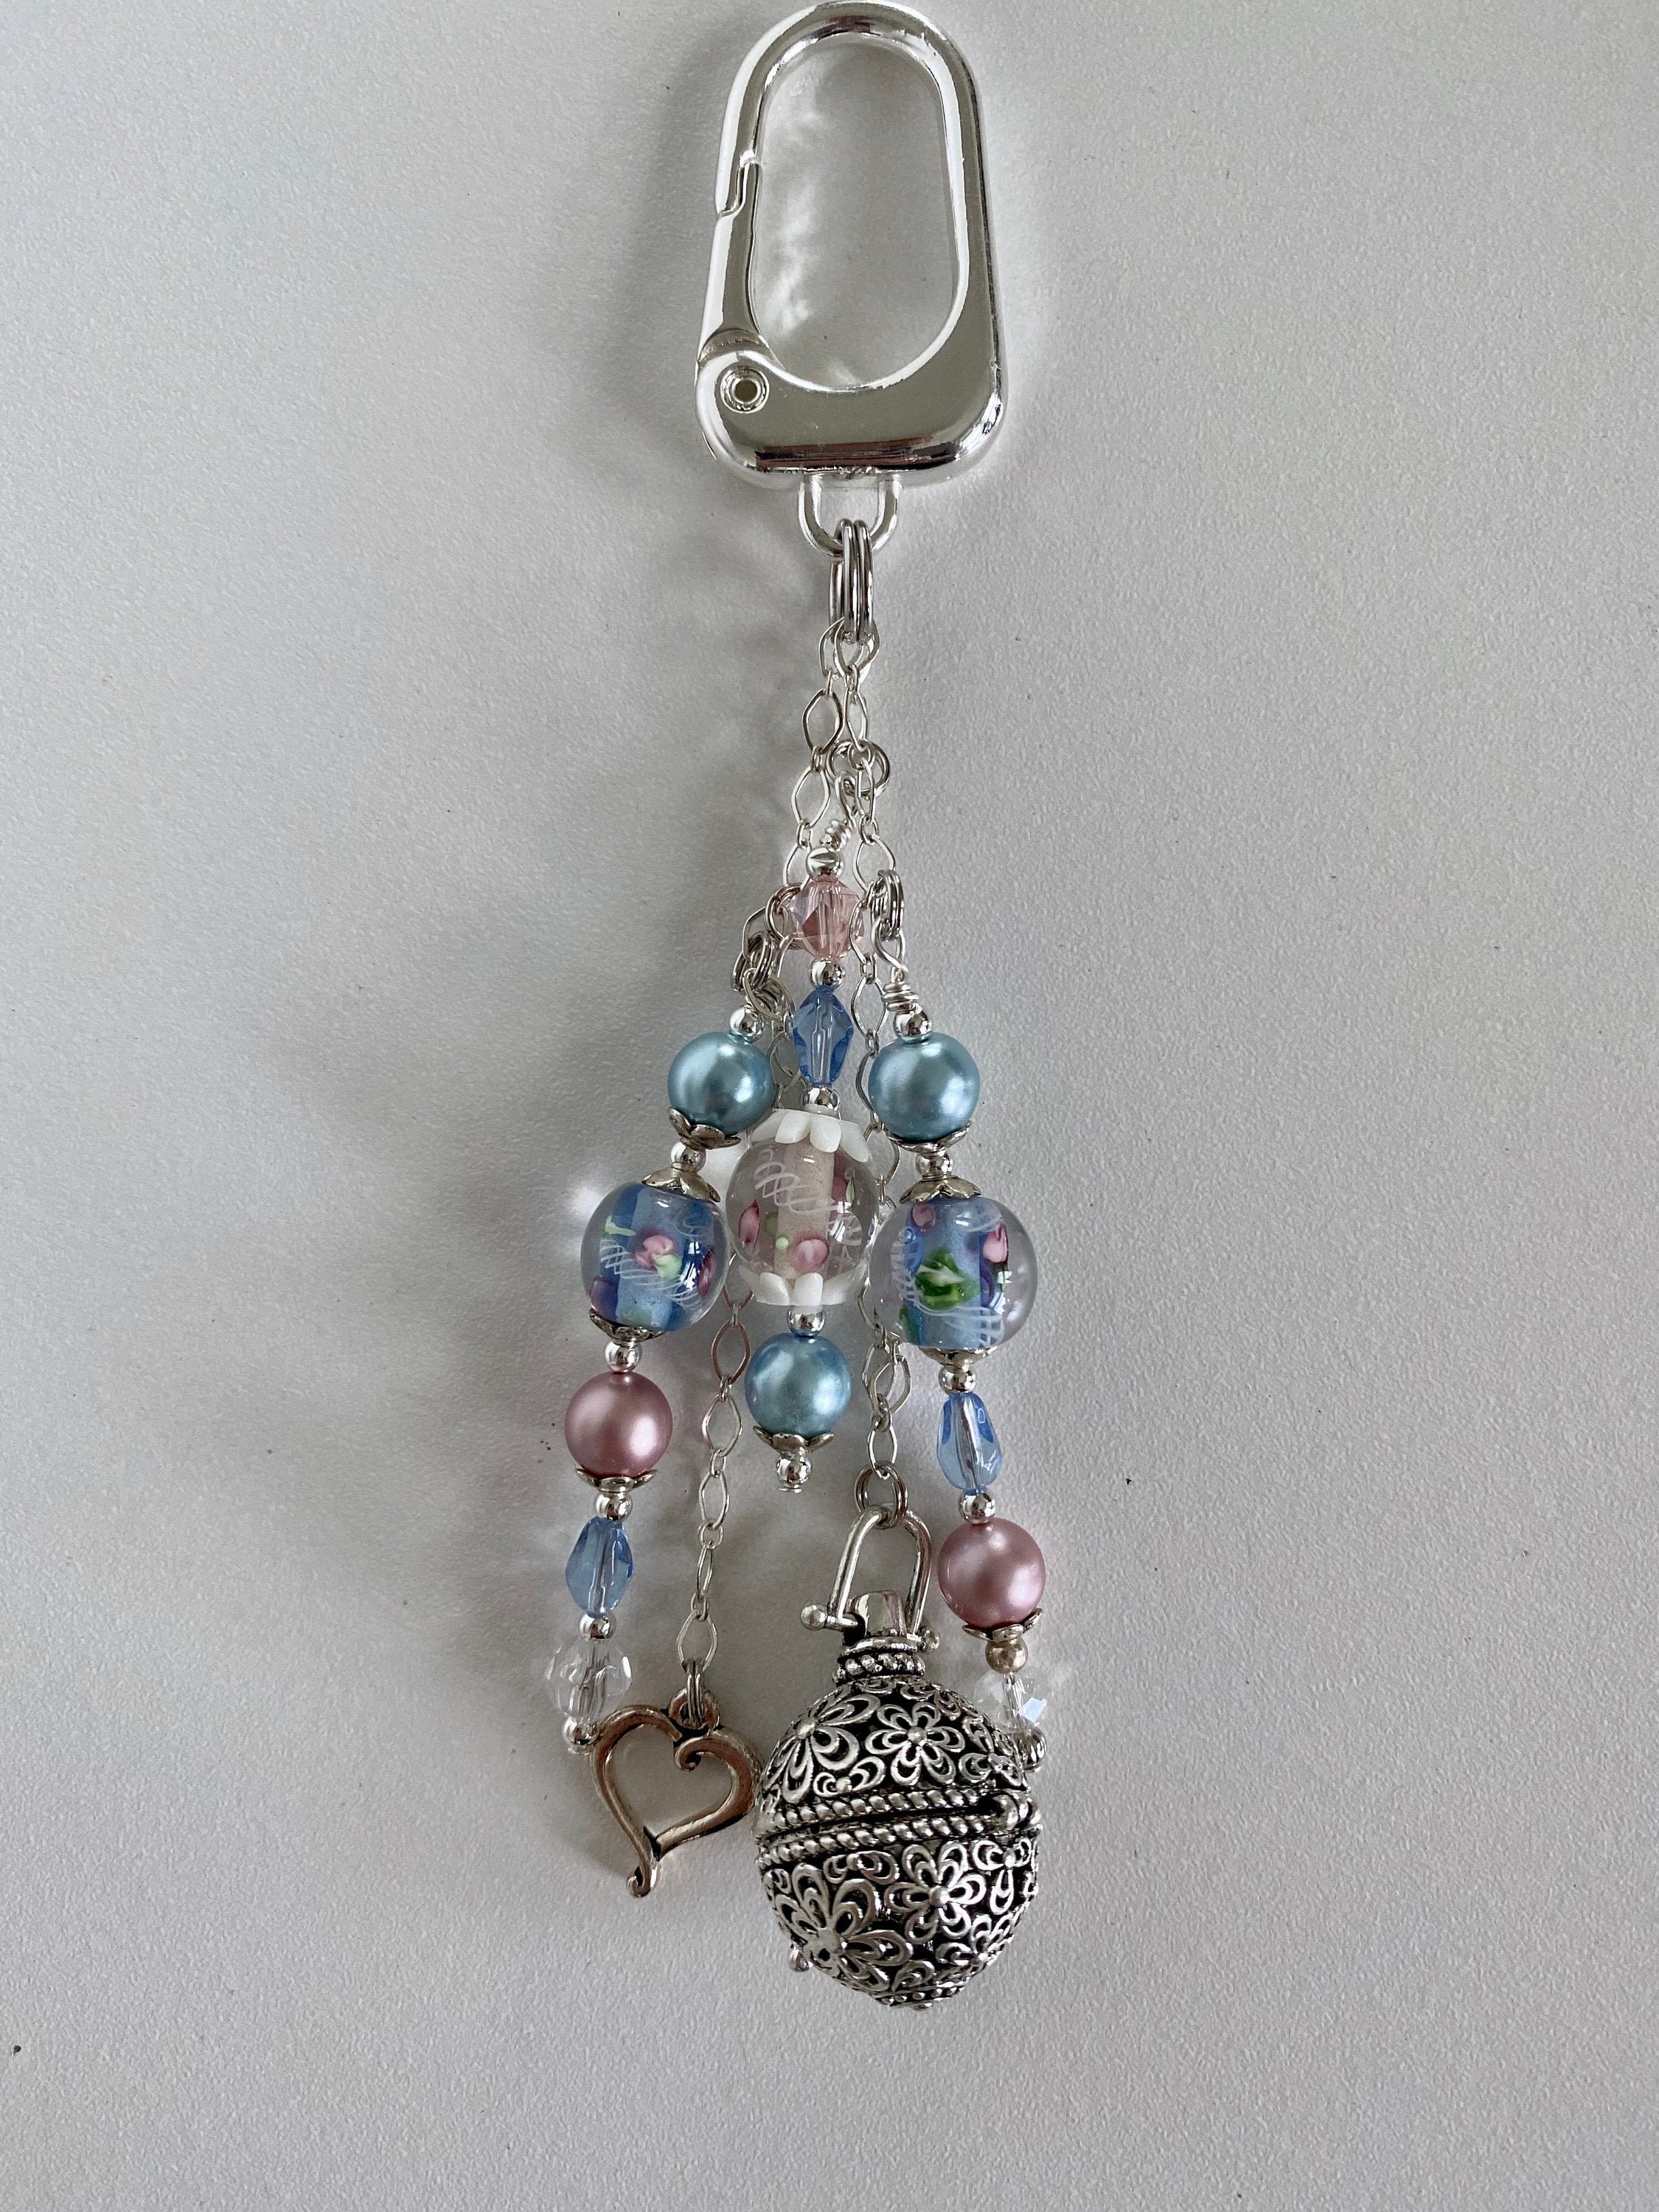 Keychain for Women Purse Charms for Handbags Crystal India | Ubuy